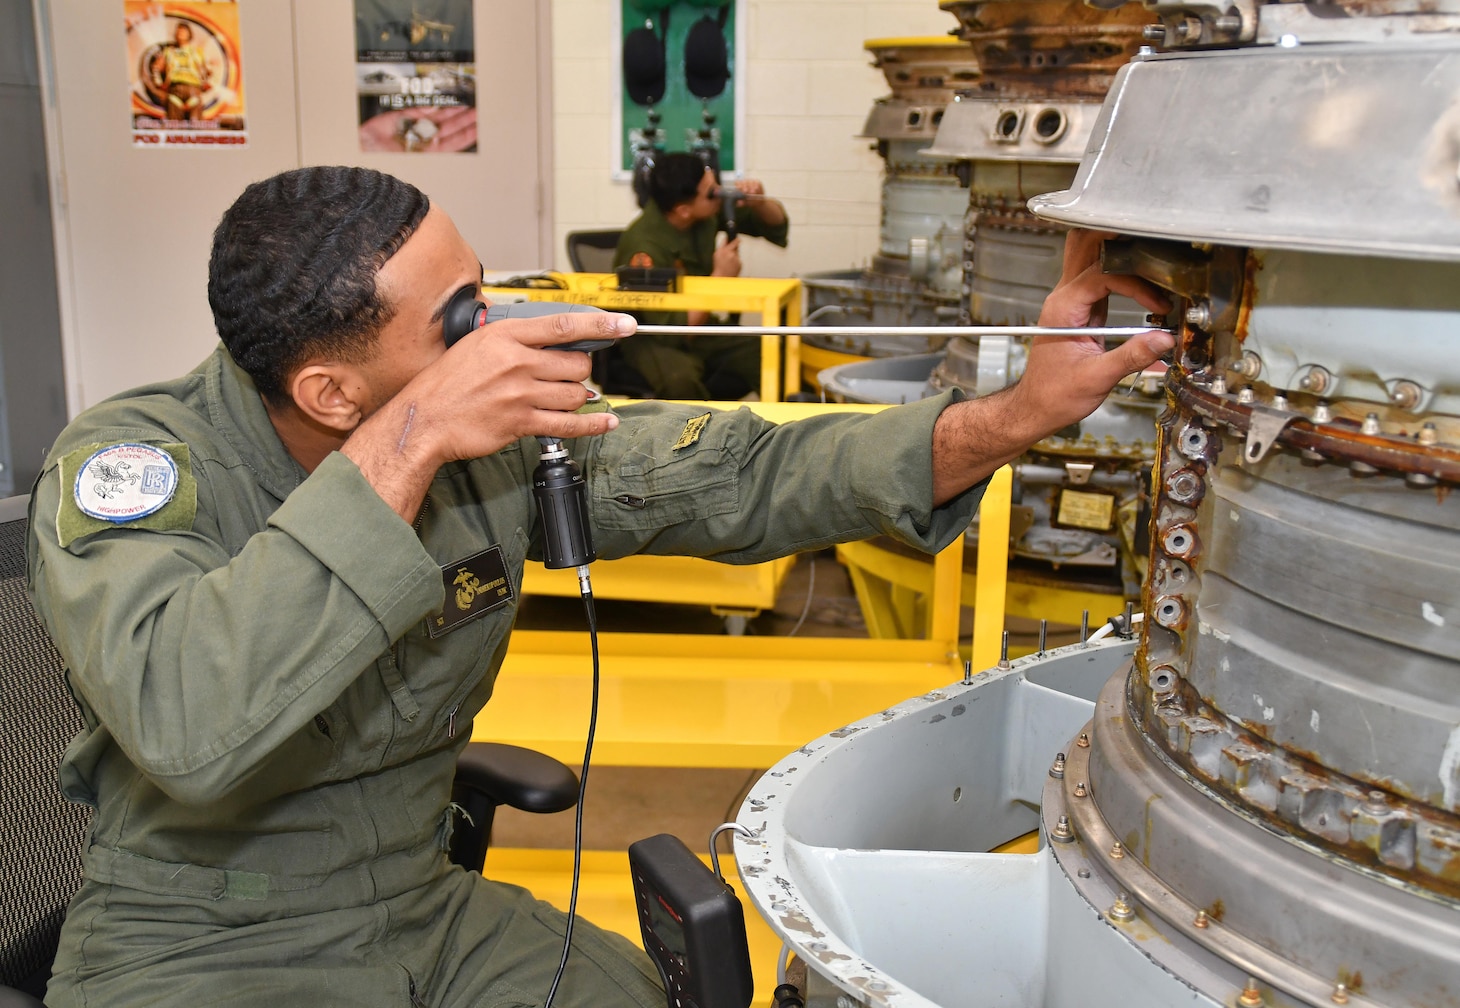 Marine Corps Sgt. Eric Andrekopoulos, assigned to Marine Attack Squadron (VMA) 223, participates in a practical exercise March 6 as part of the F402 Engine Tier 5 Remote Visual Inspection (RVI) Inspector Rating certification course at Fleet Readiness Center East.